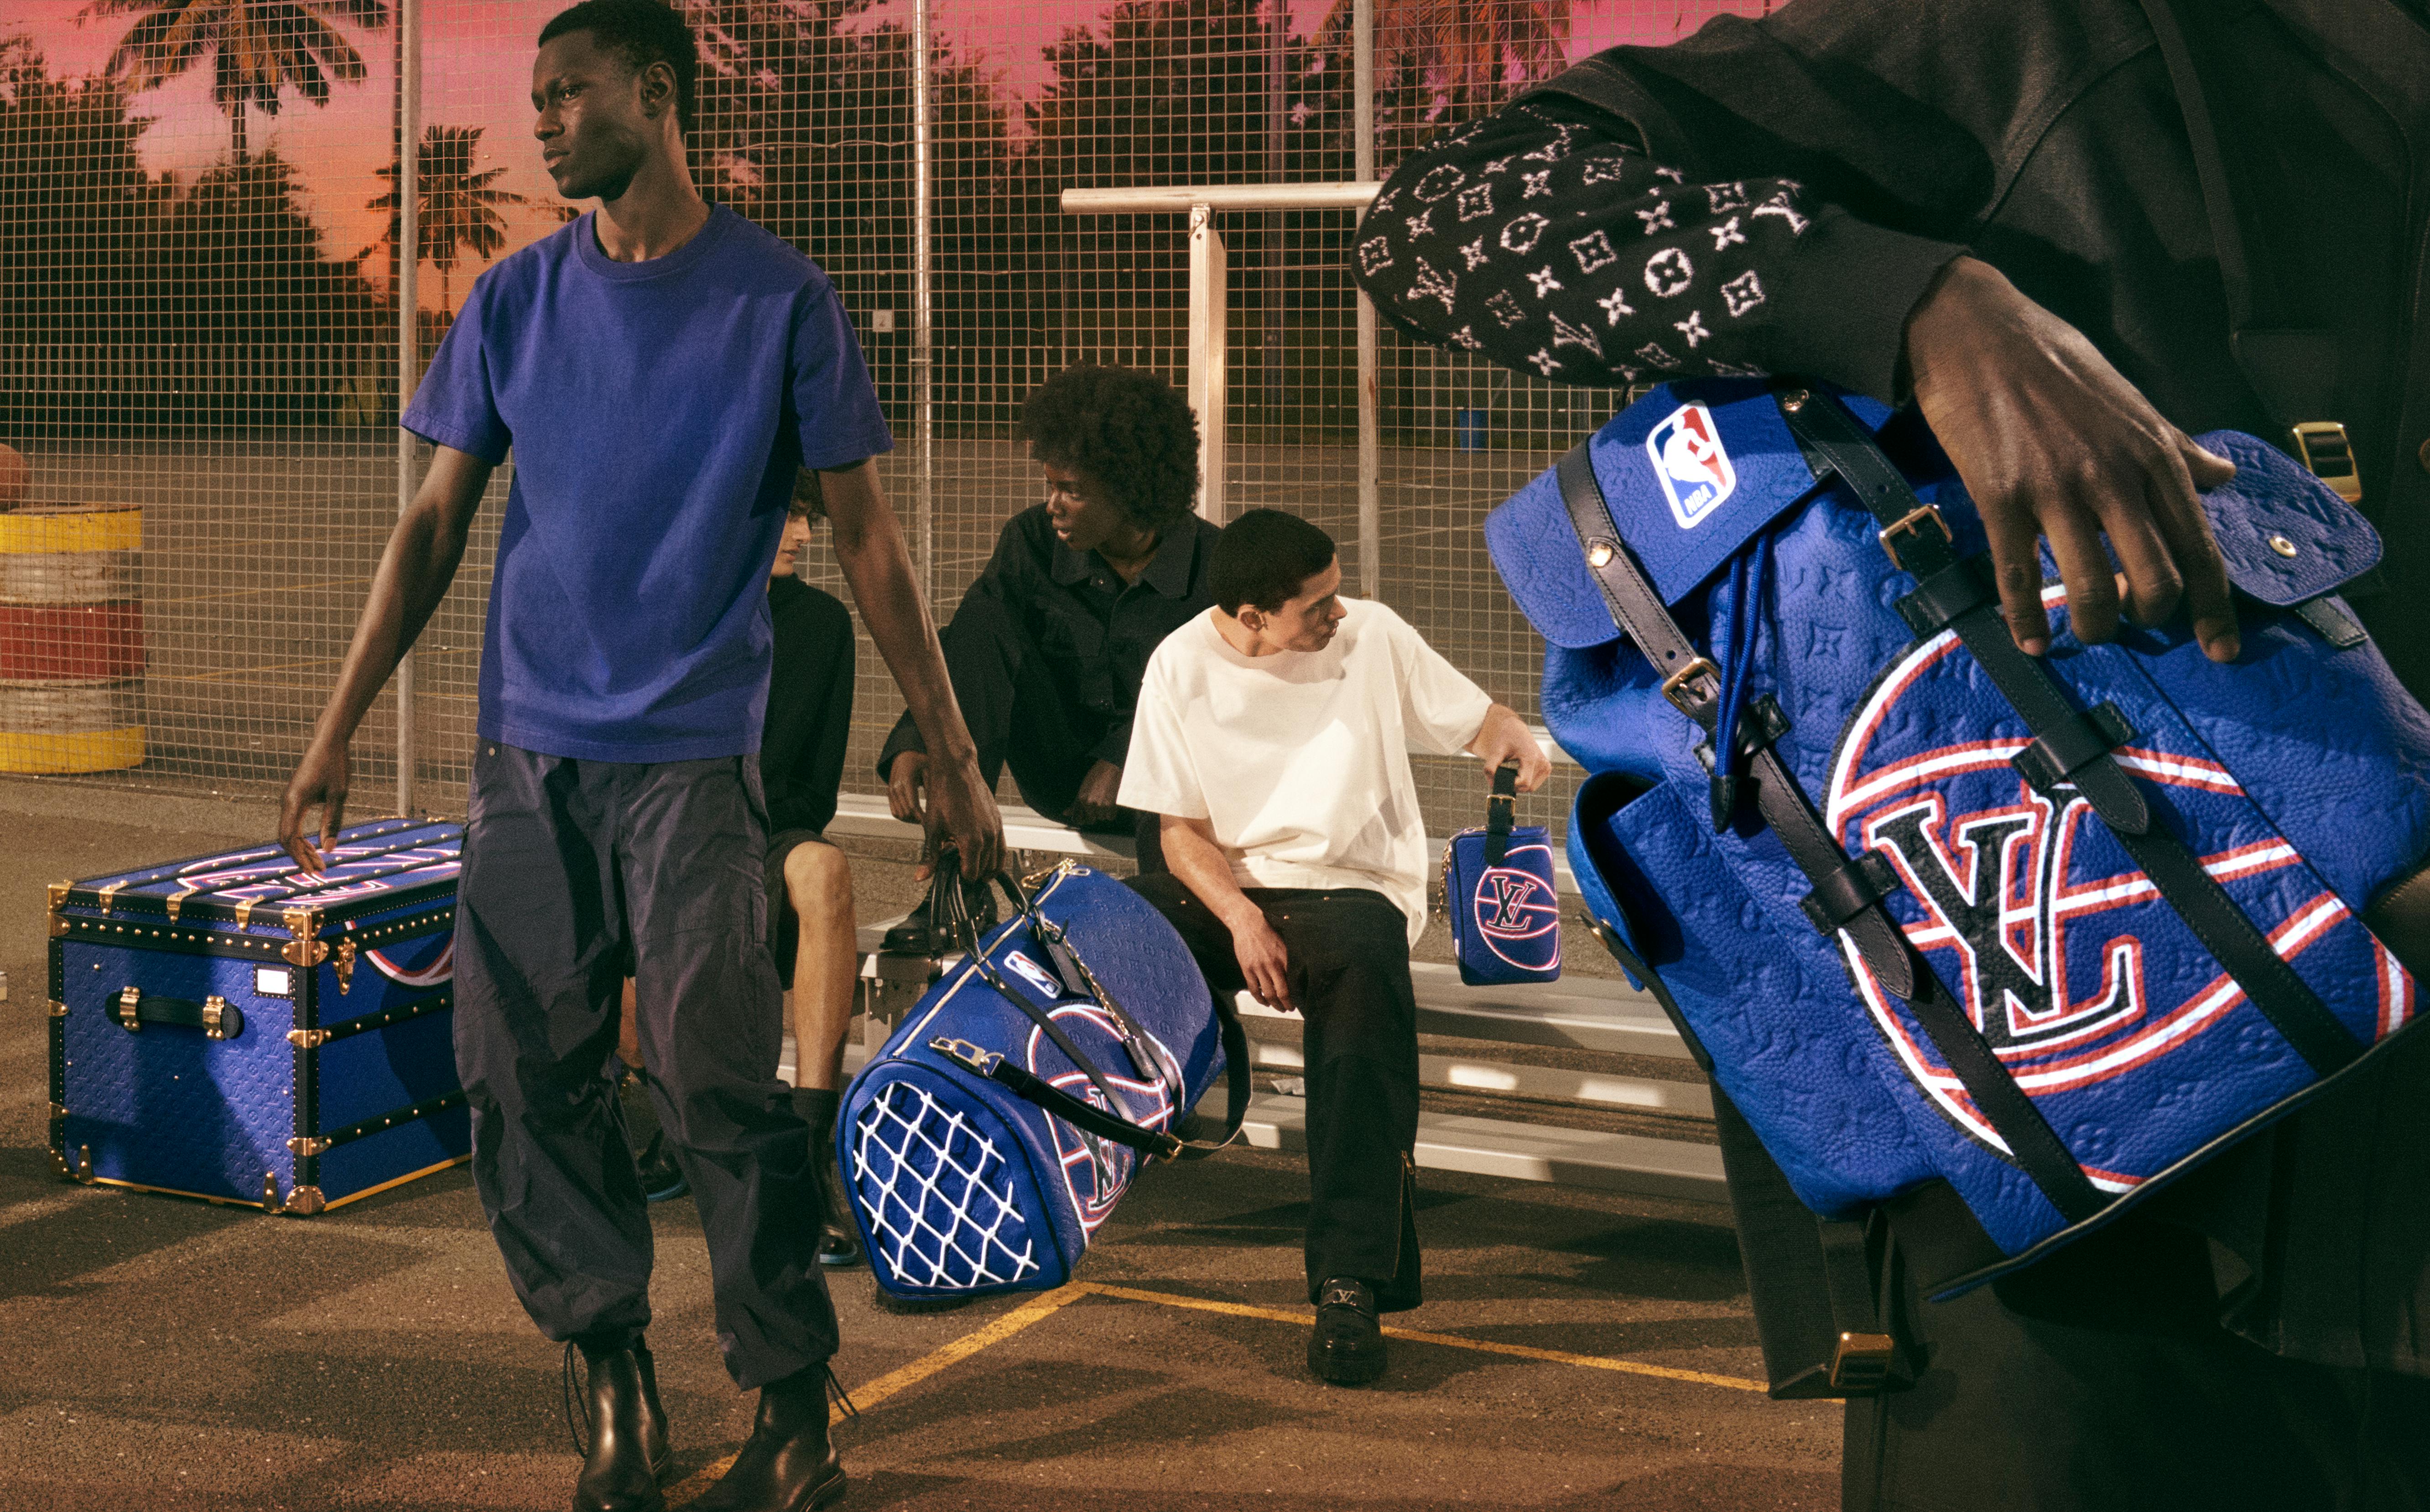 Here's Your First Look at the Louis Vuitton x NBA Capsule